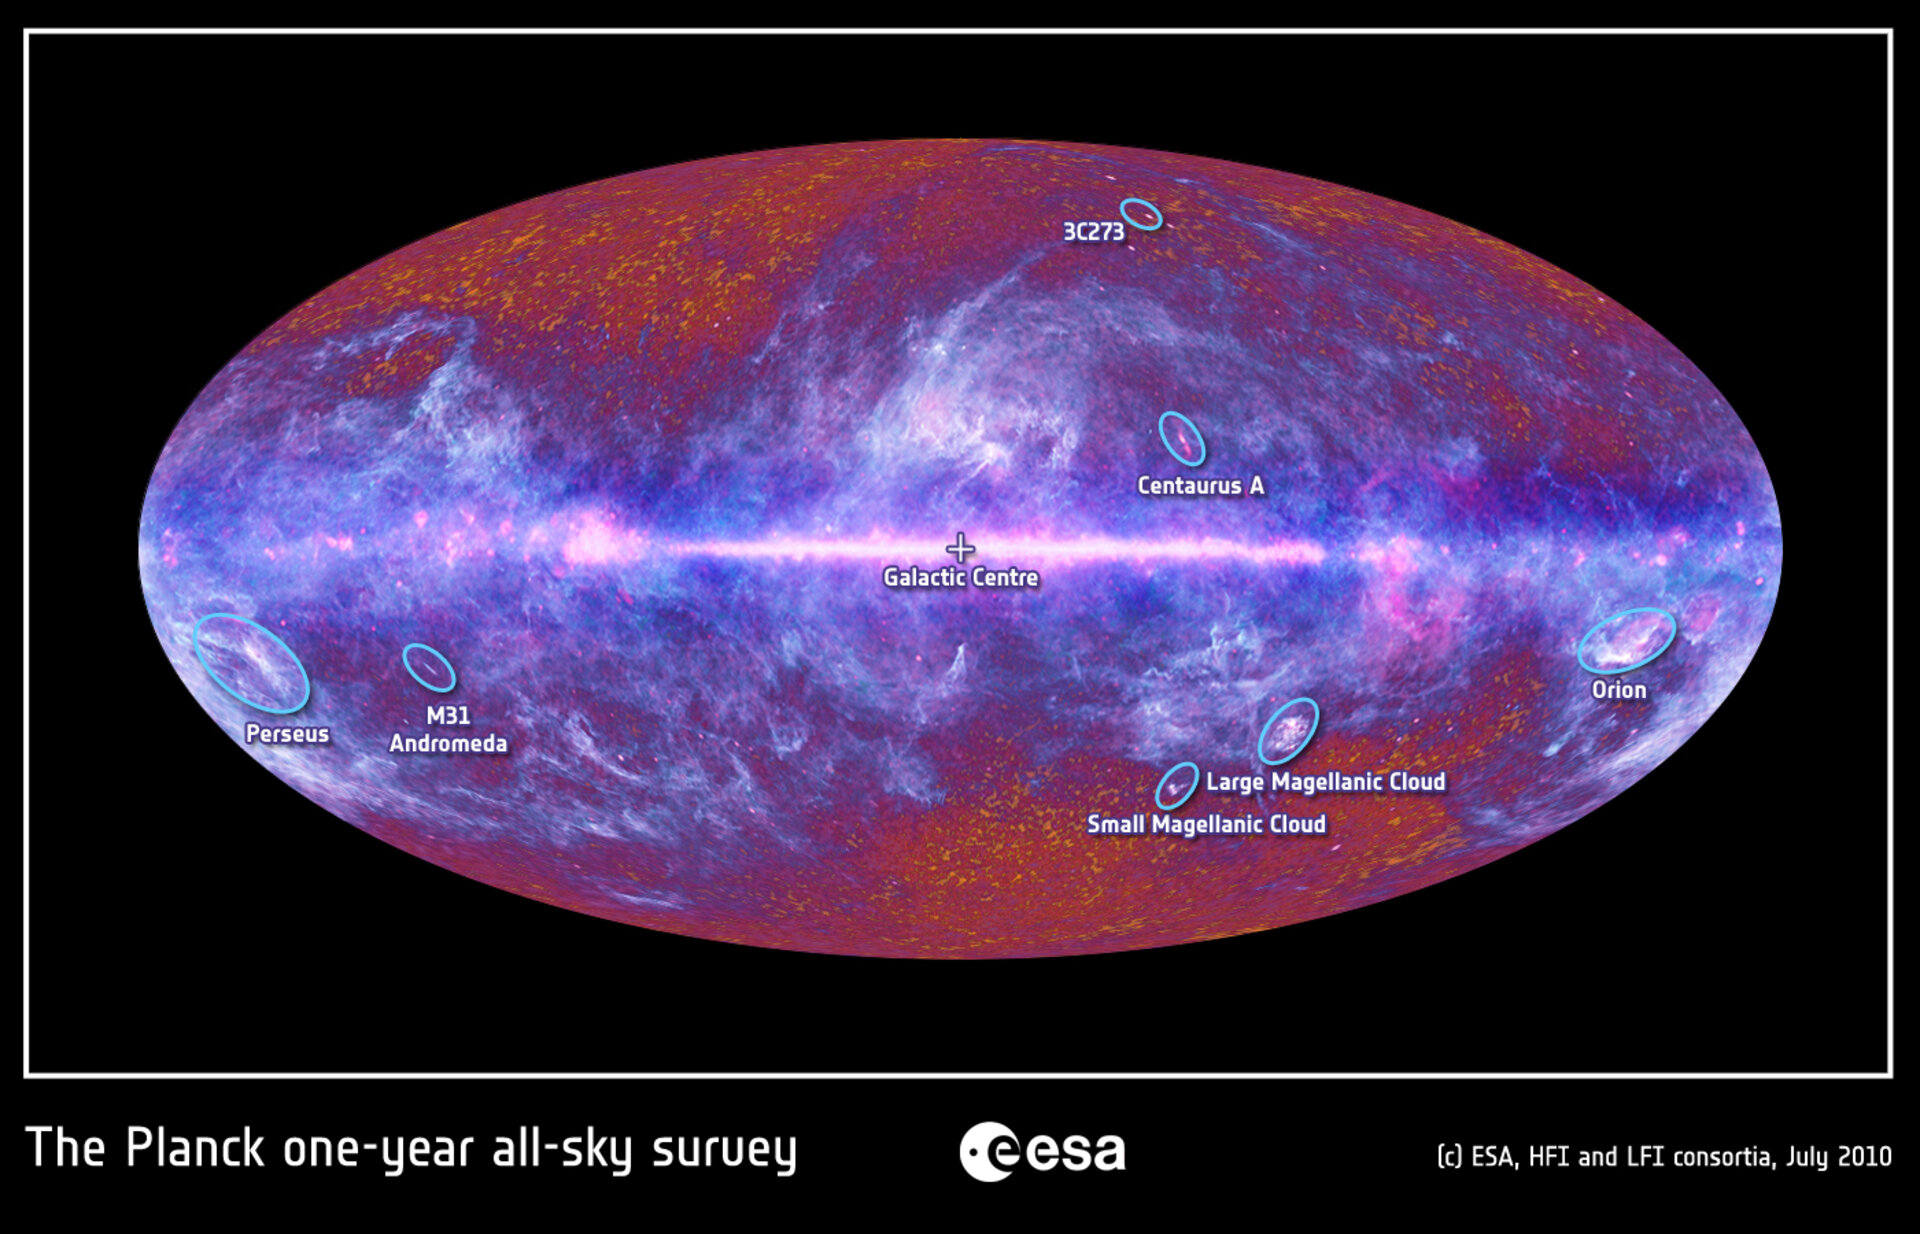 The microwave sky as seen by Planck with objects labeled